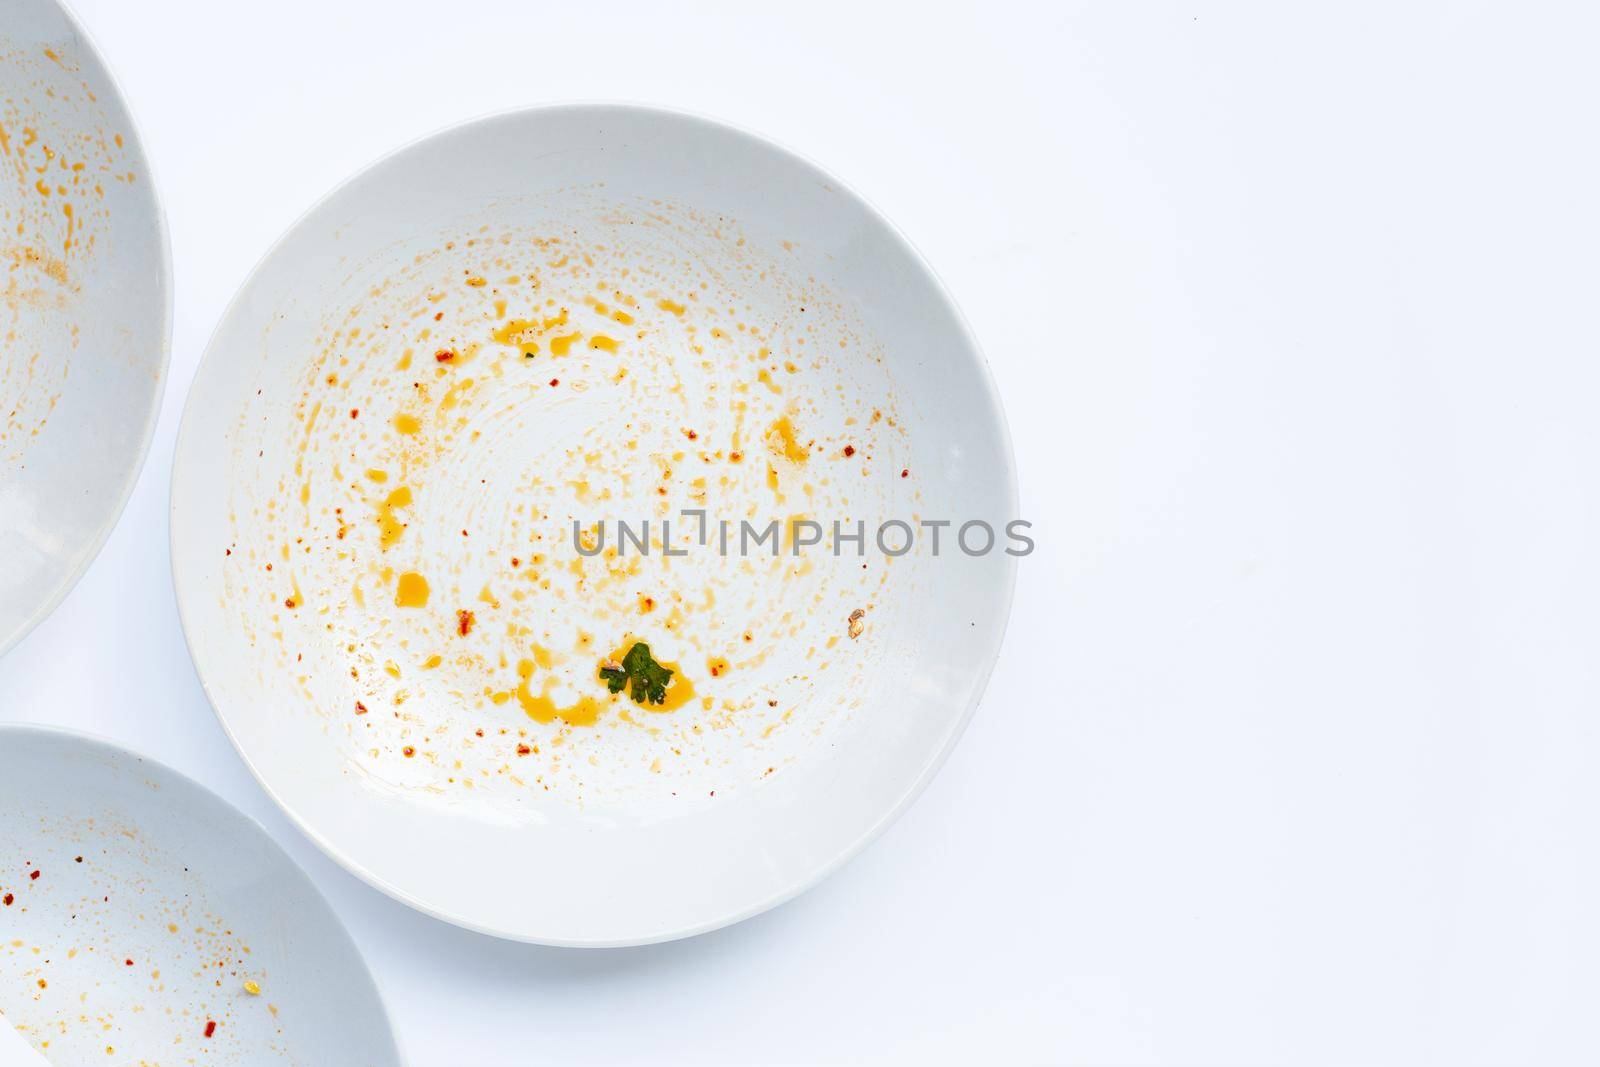 Dirty dish on white background. Top view